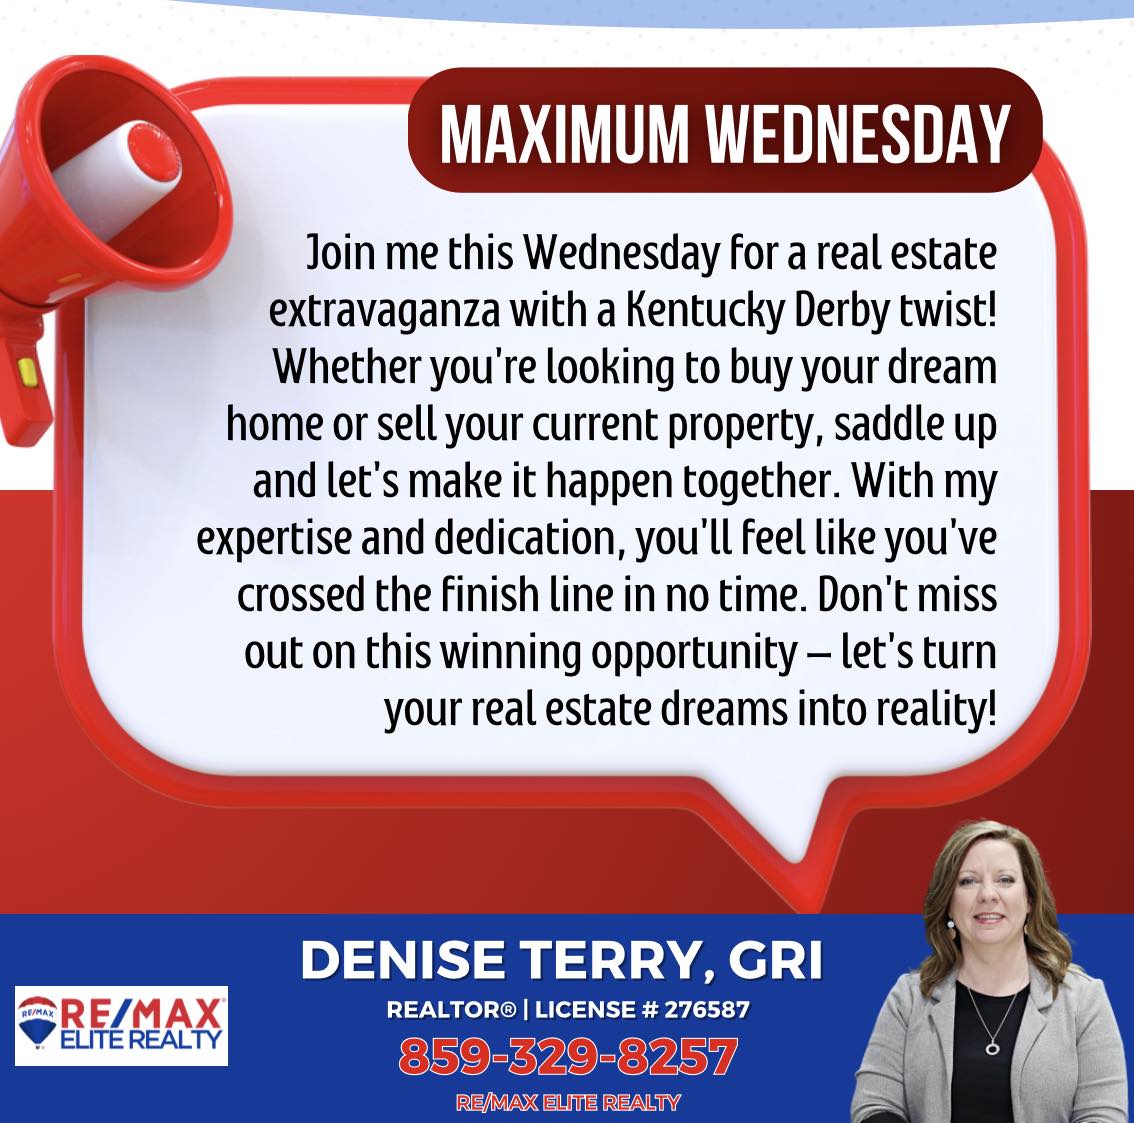 Ready to gallop towards your dream home like it's Derby Day every day! 🏡 #RealEstate #NoHiddenFees #HiddenFREES #REMax #REMaxEliteRealty #MaximumWednesday #Bluegrassrealtors #playingtowin @vaughtsviews